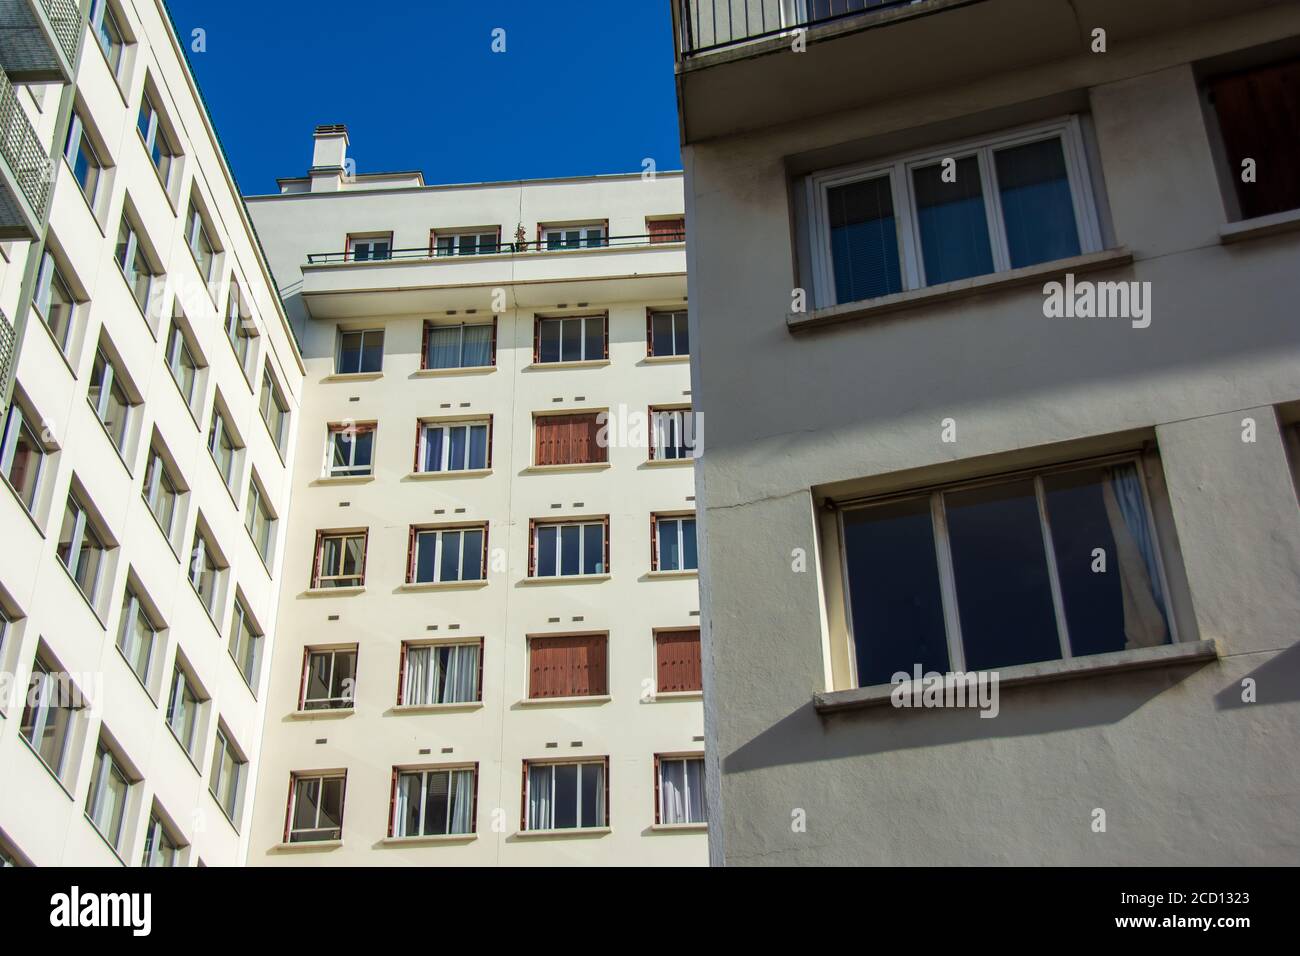 Real estate / housing market: exterior view of residential buildings with many apartment windows Stock Photo